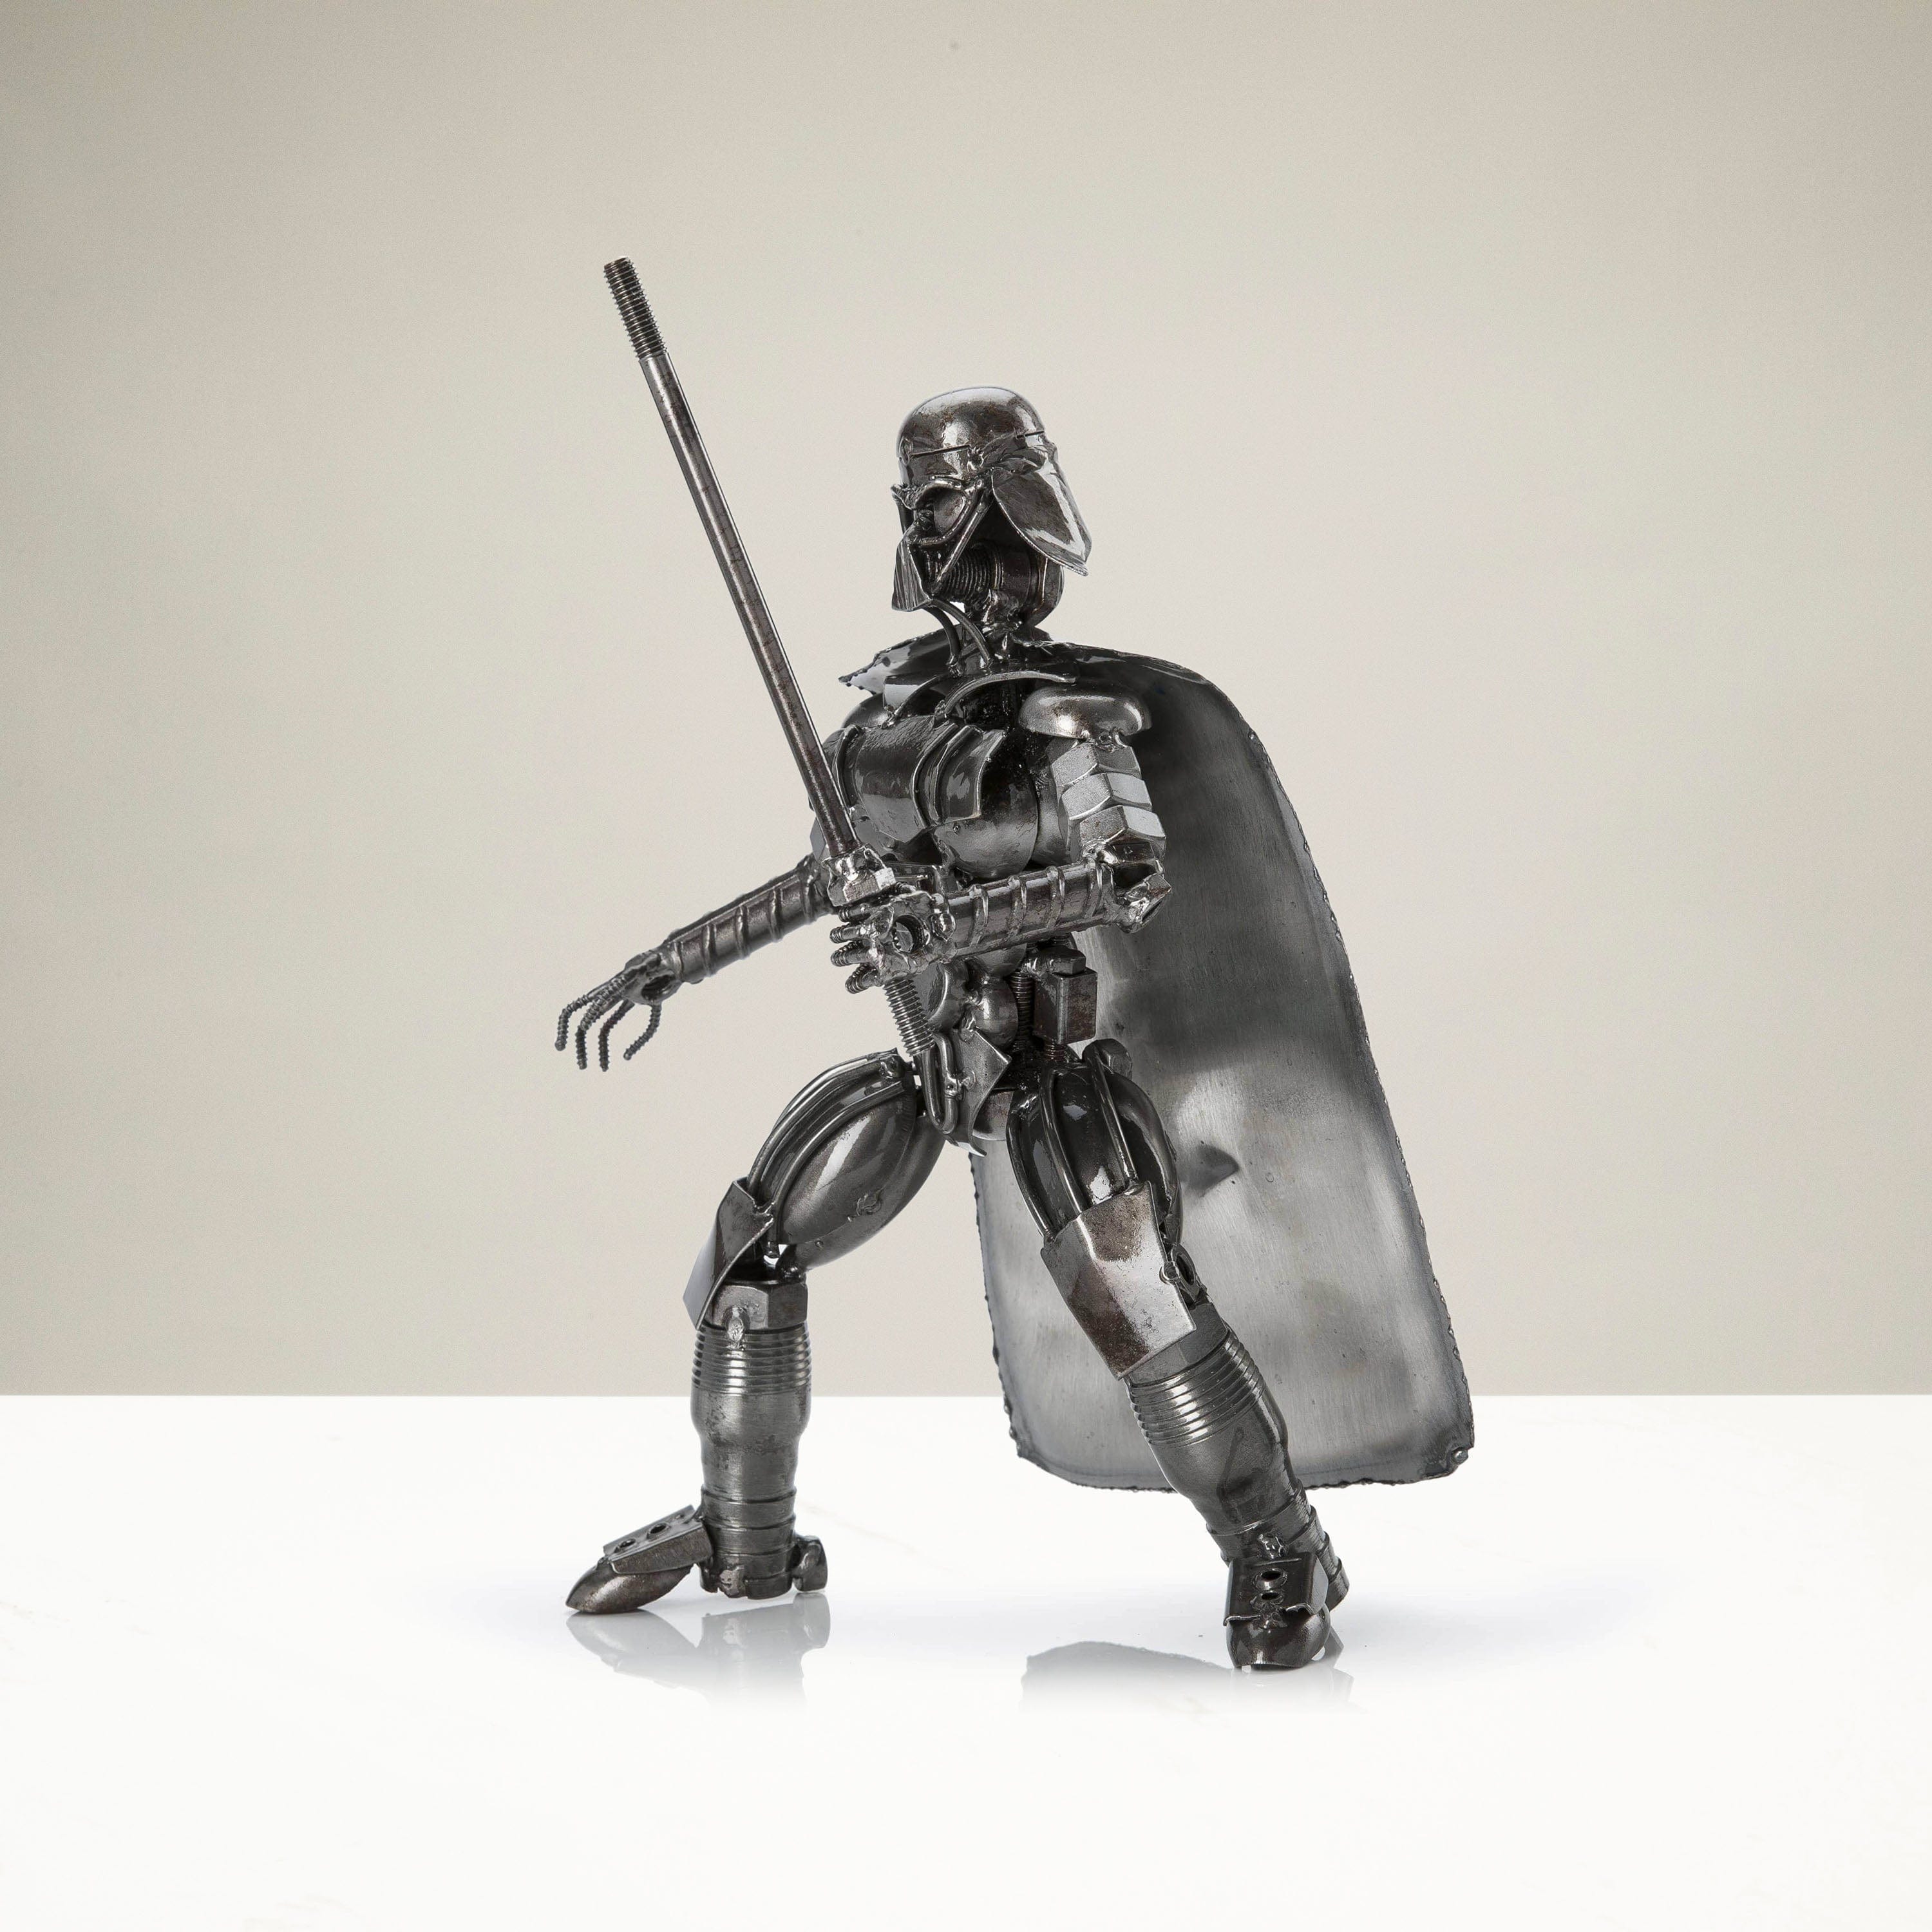 Kalifano Recycled Metal Art Darth Vader with Sword Inspired Recycled Metal Sculpture RMS-700DVA-N